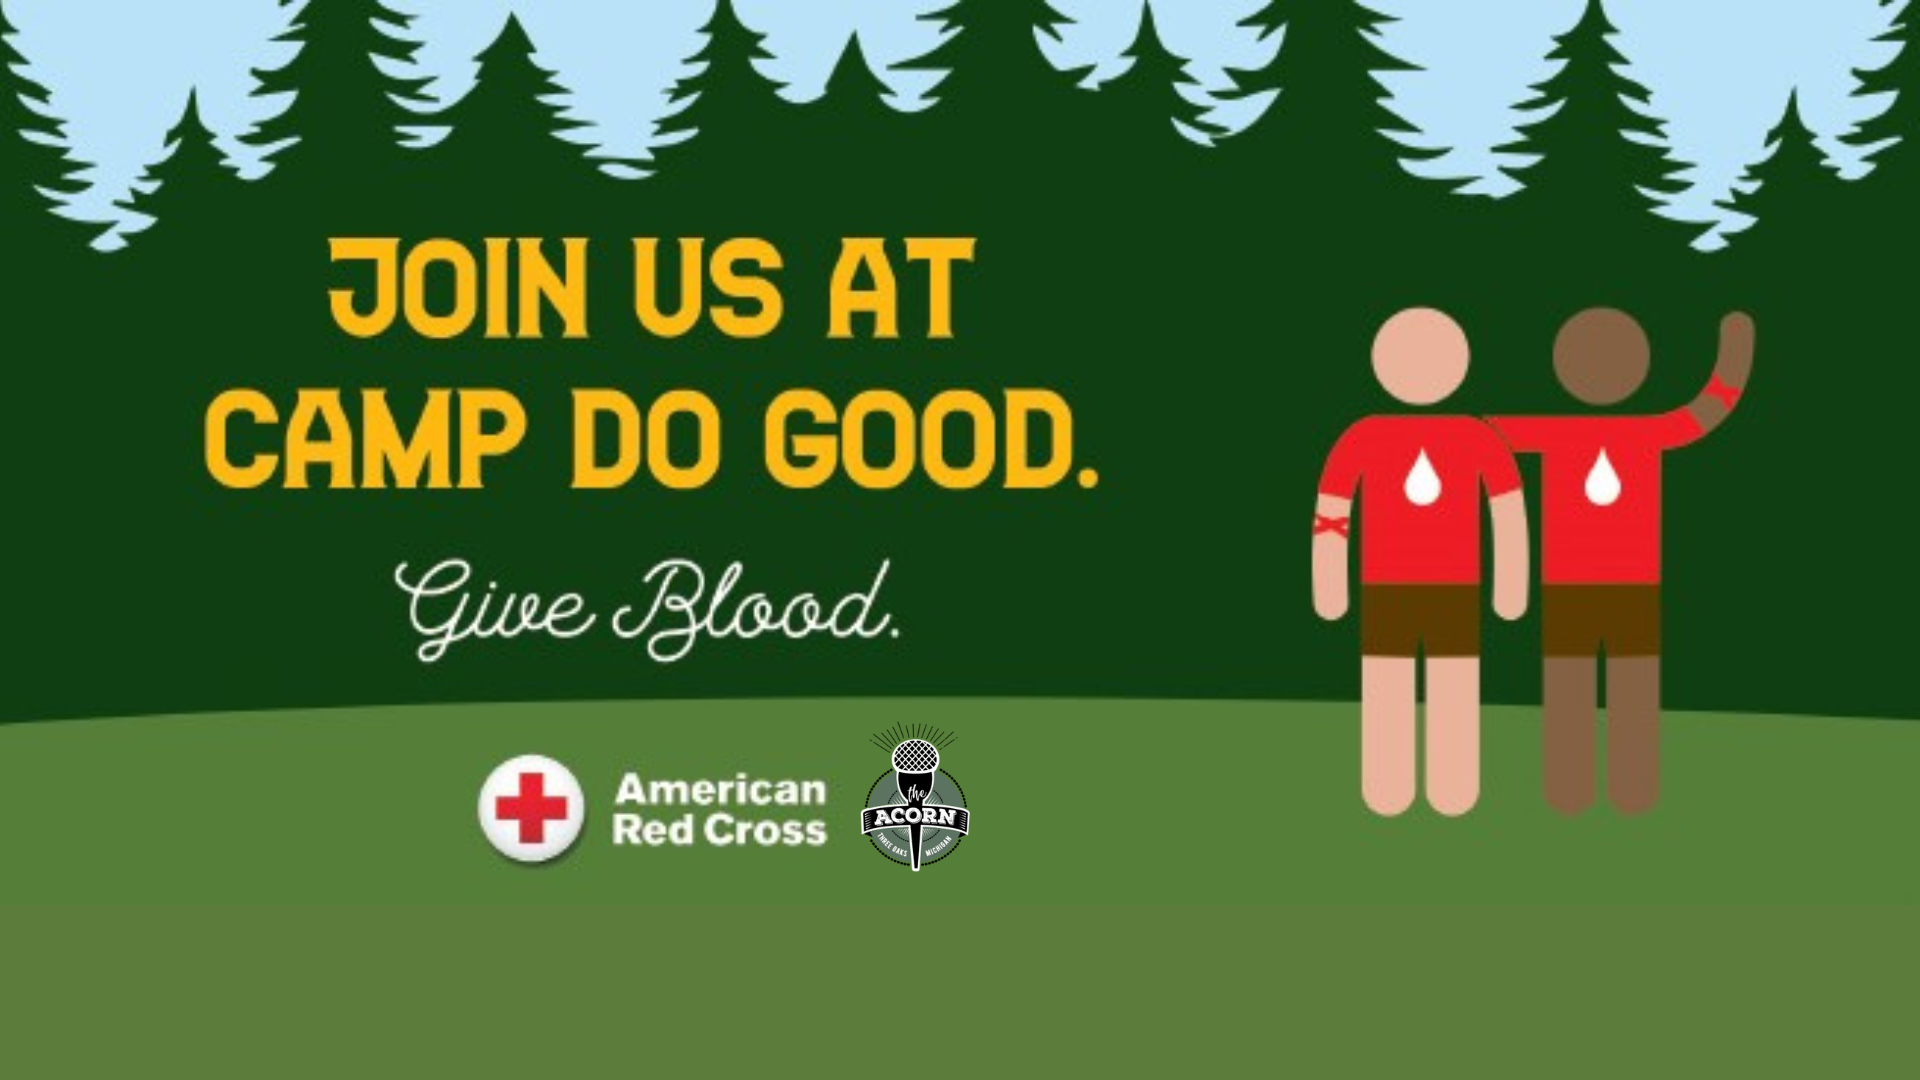 , The Acorn is pleased to continue our partnership with the American Red Cross